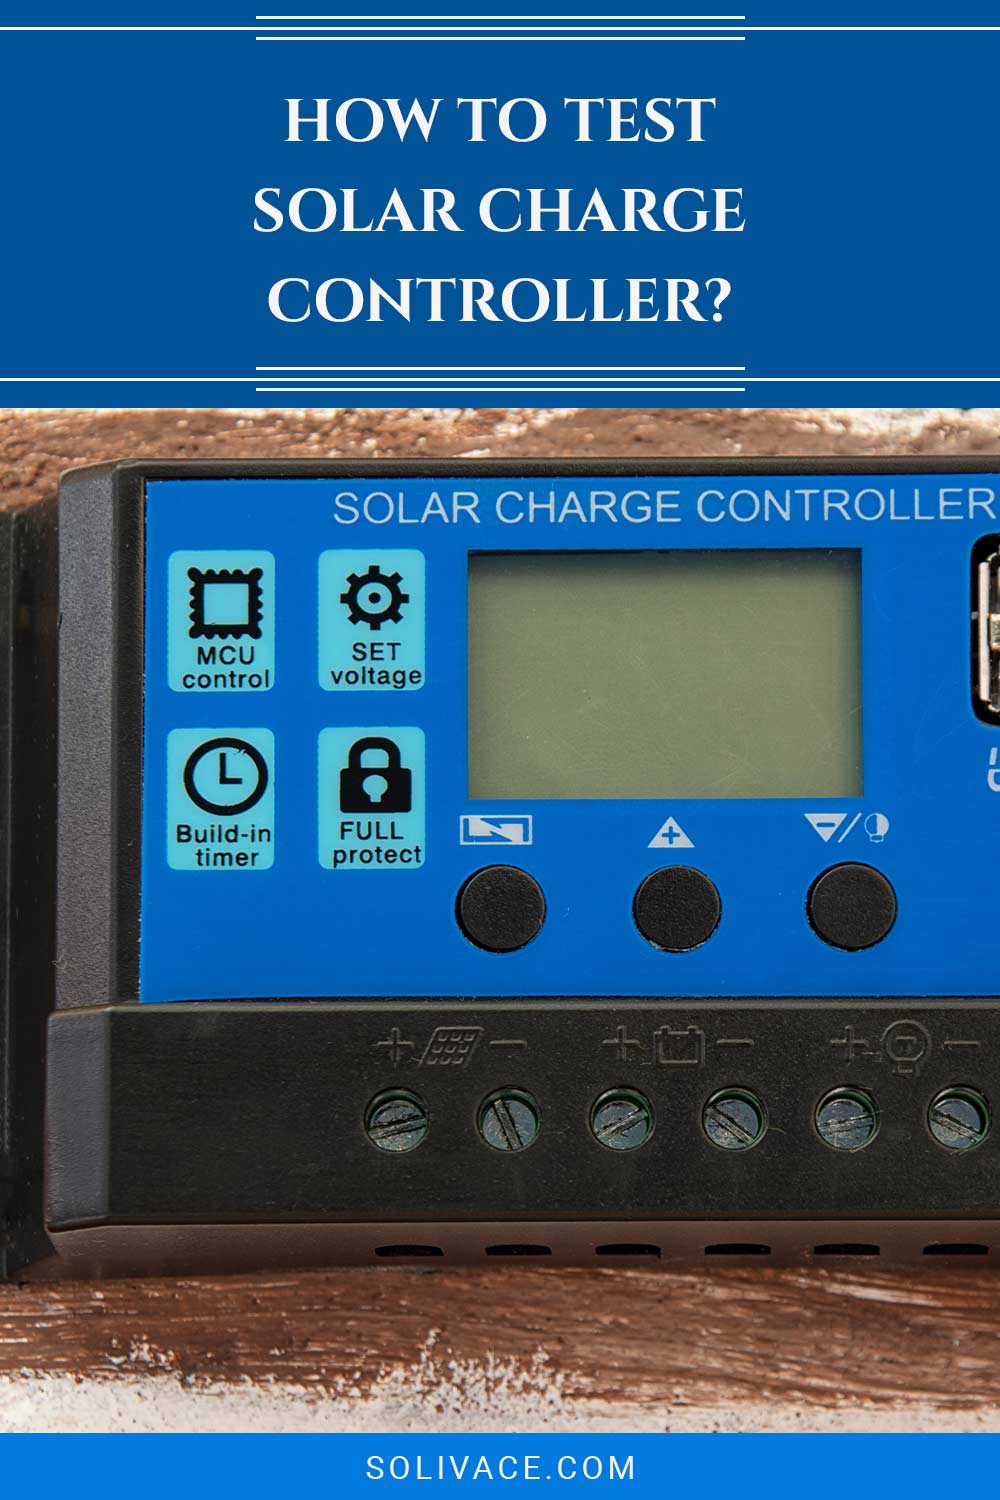 How To Test Solar Charge Controller?